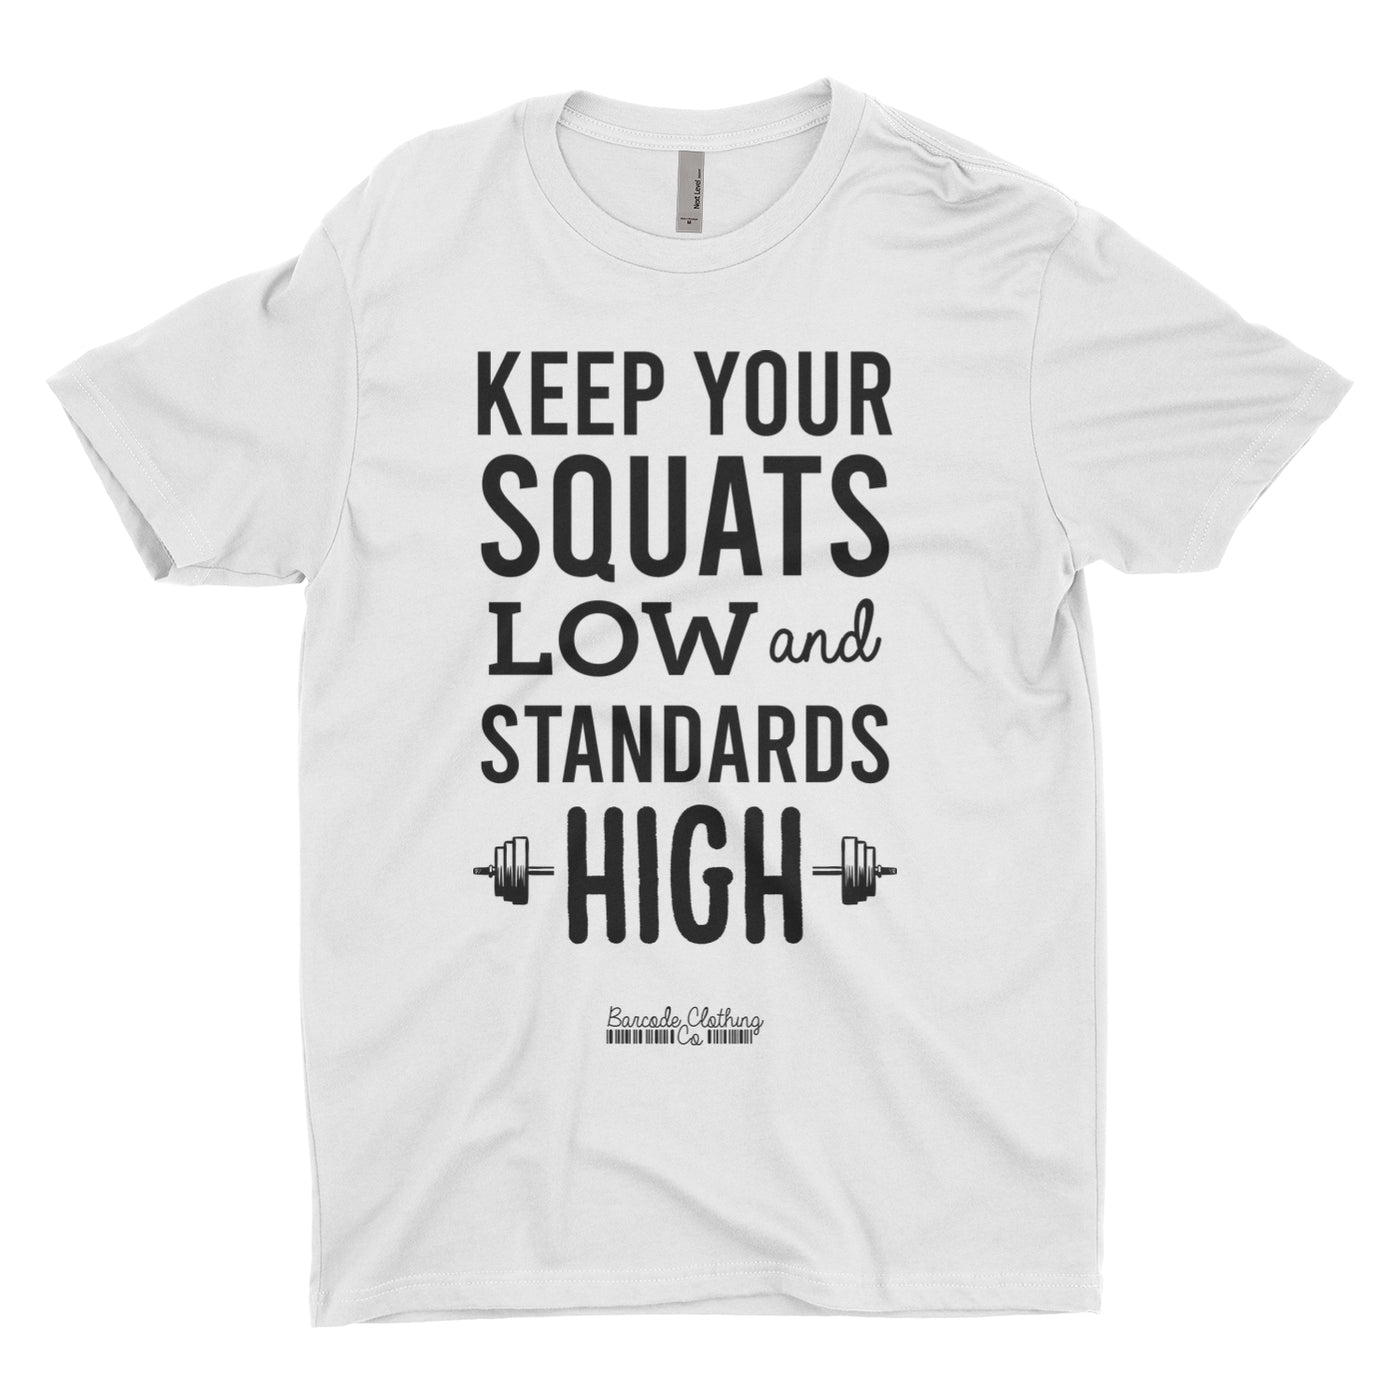 Keep Your Squats Blacked Out